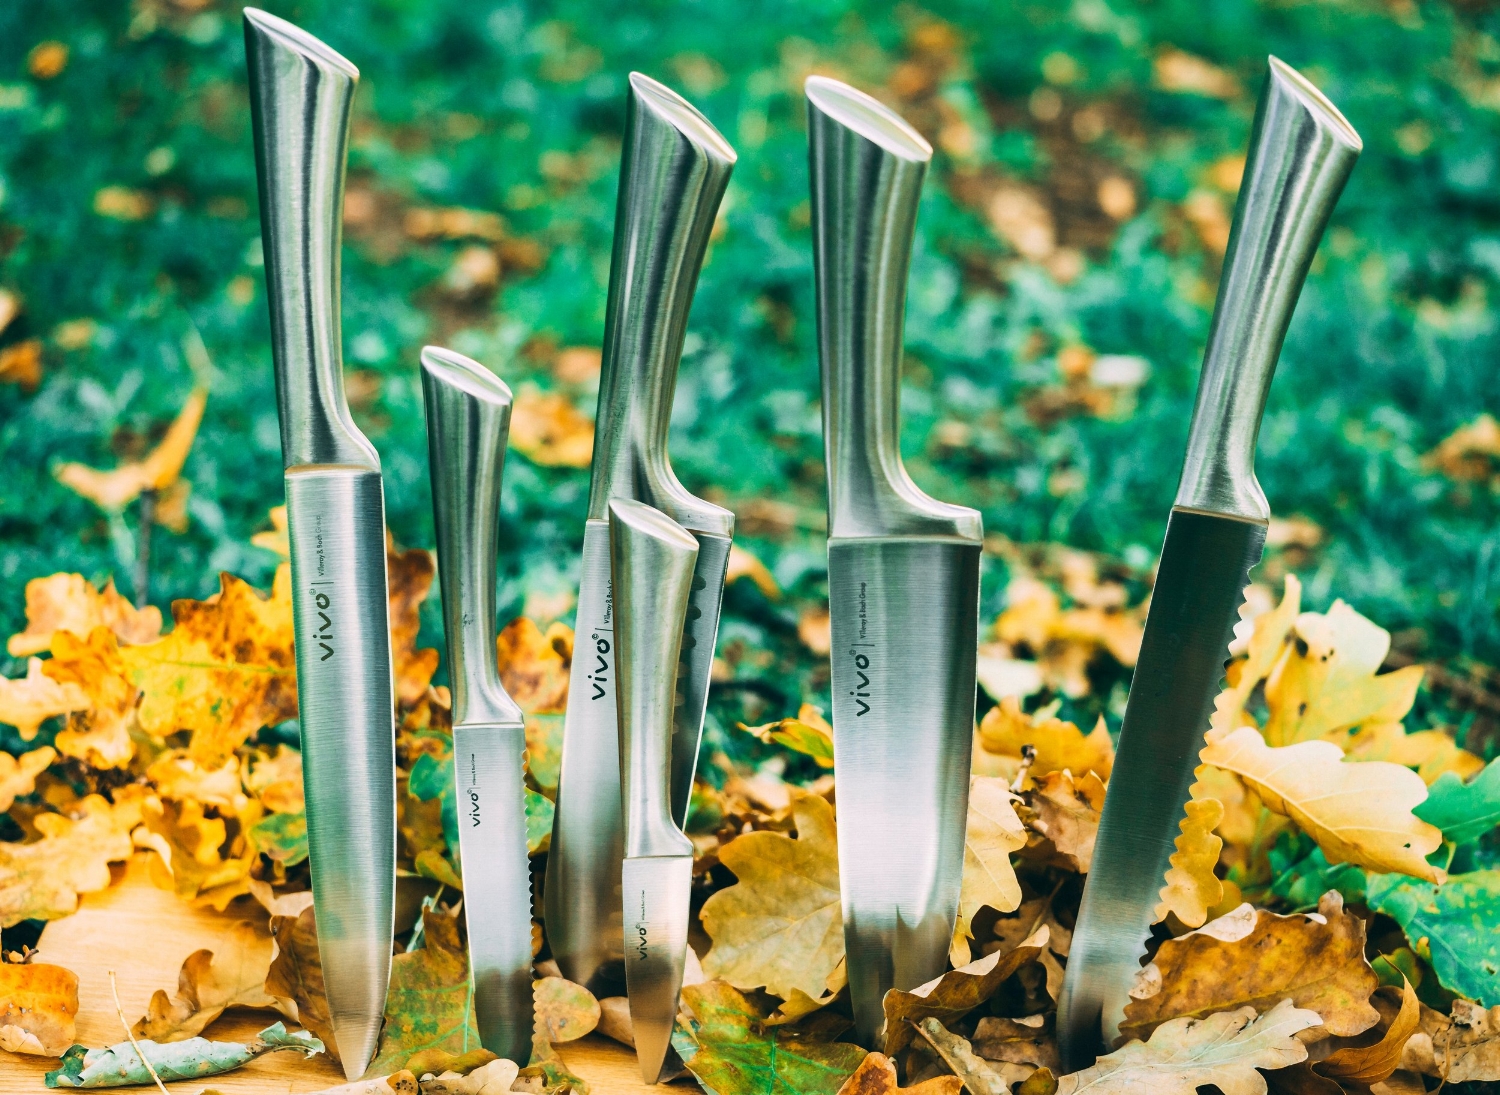 https://images.squarespace-cdn.com/content/v1/58a24e42893fc0a86bdef4ae/1541178574353-6BZLI3C79T8JNBQGPI26/knives-in-leaves.jpg